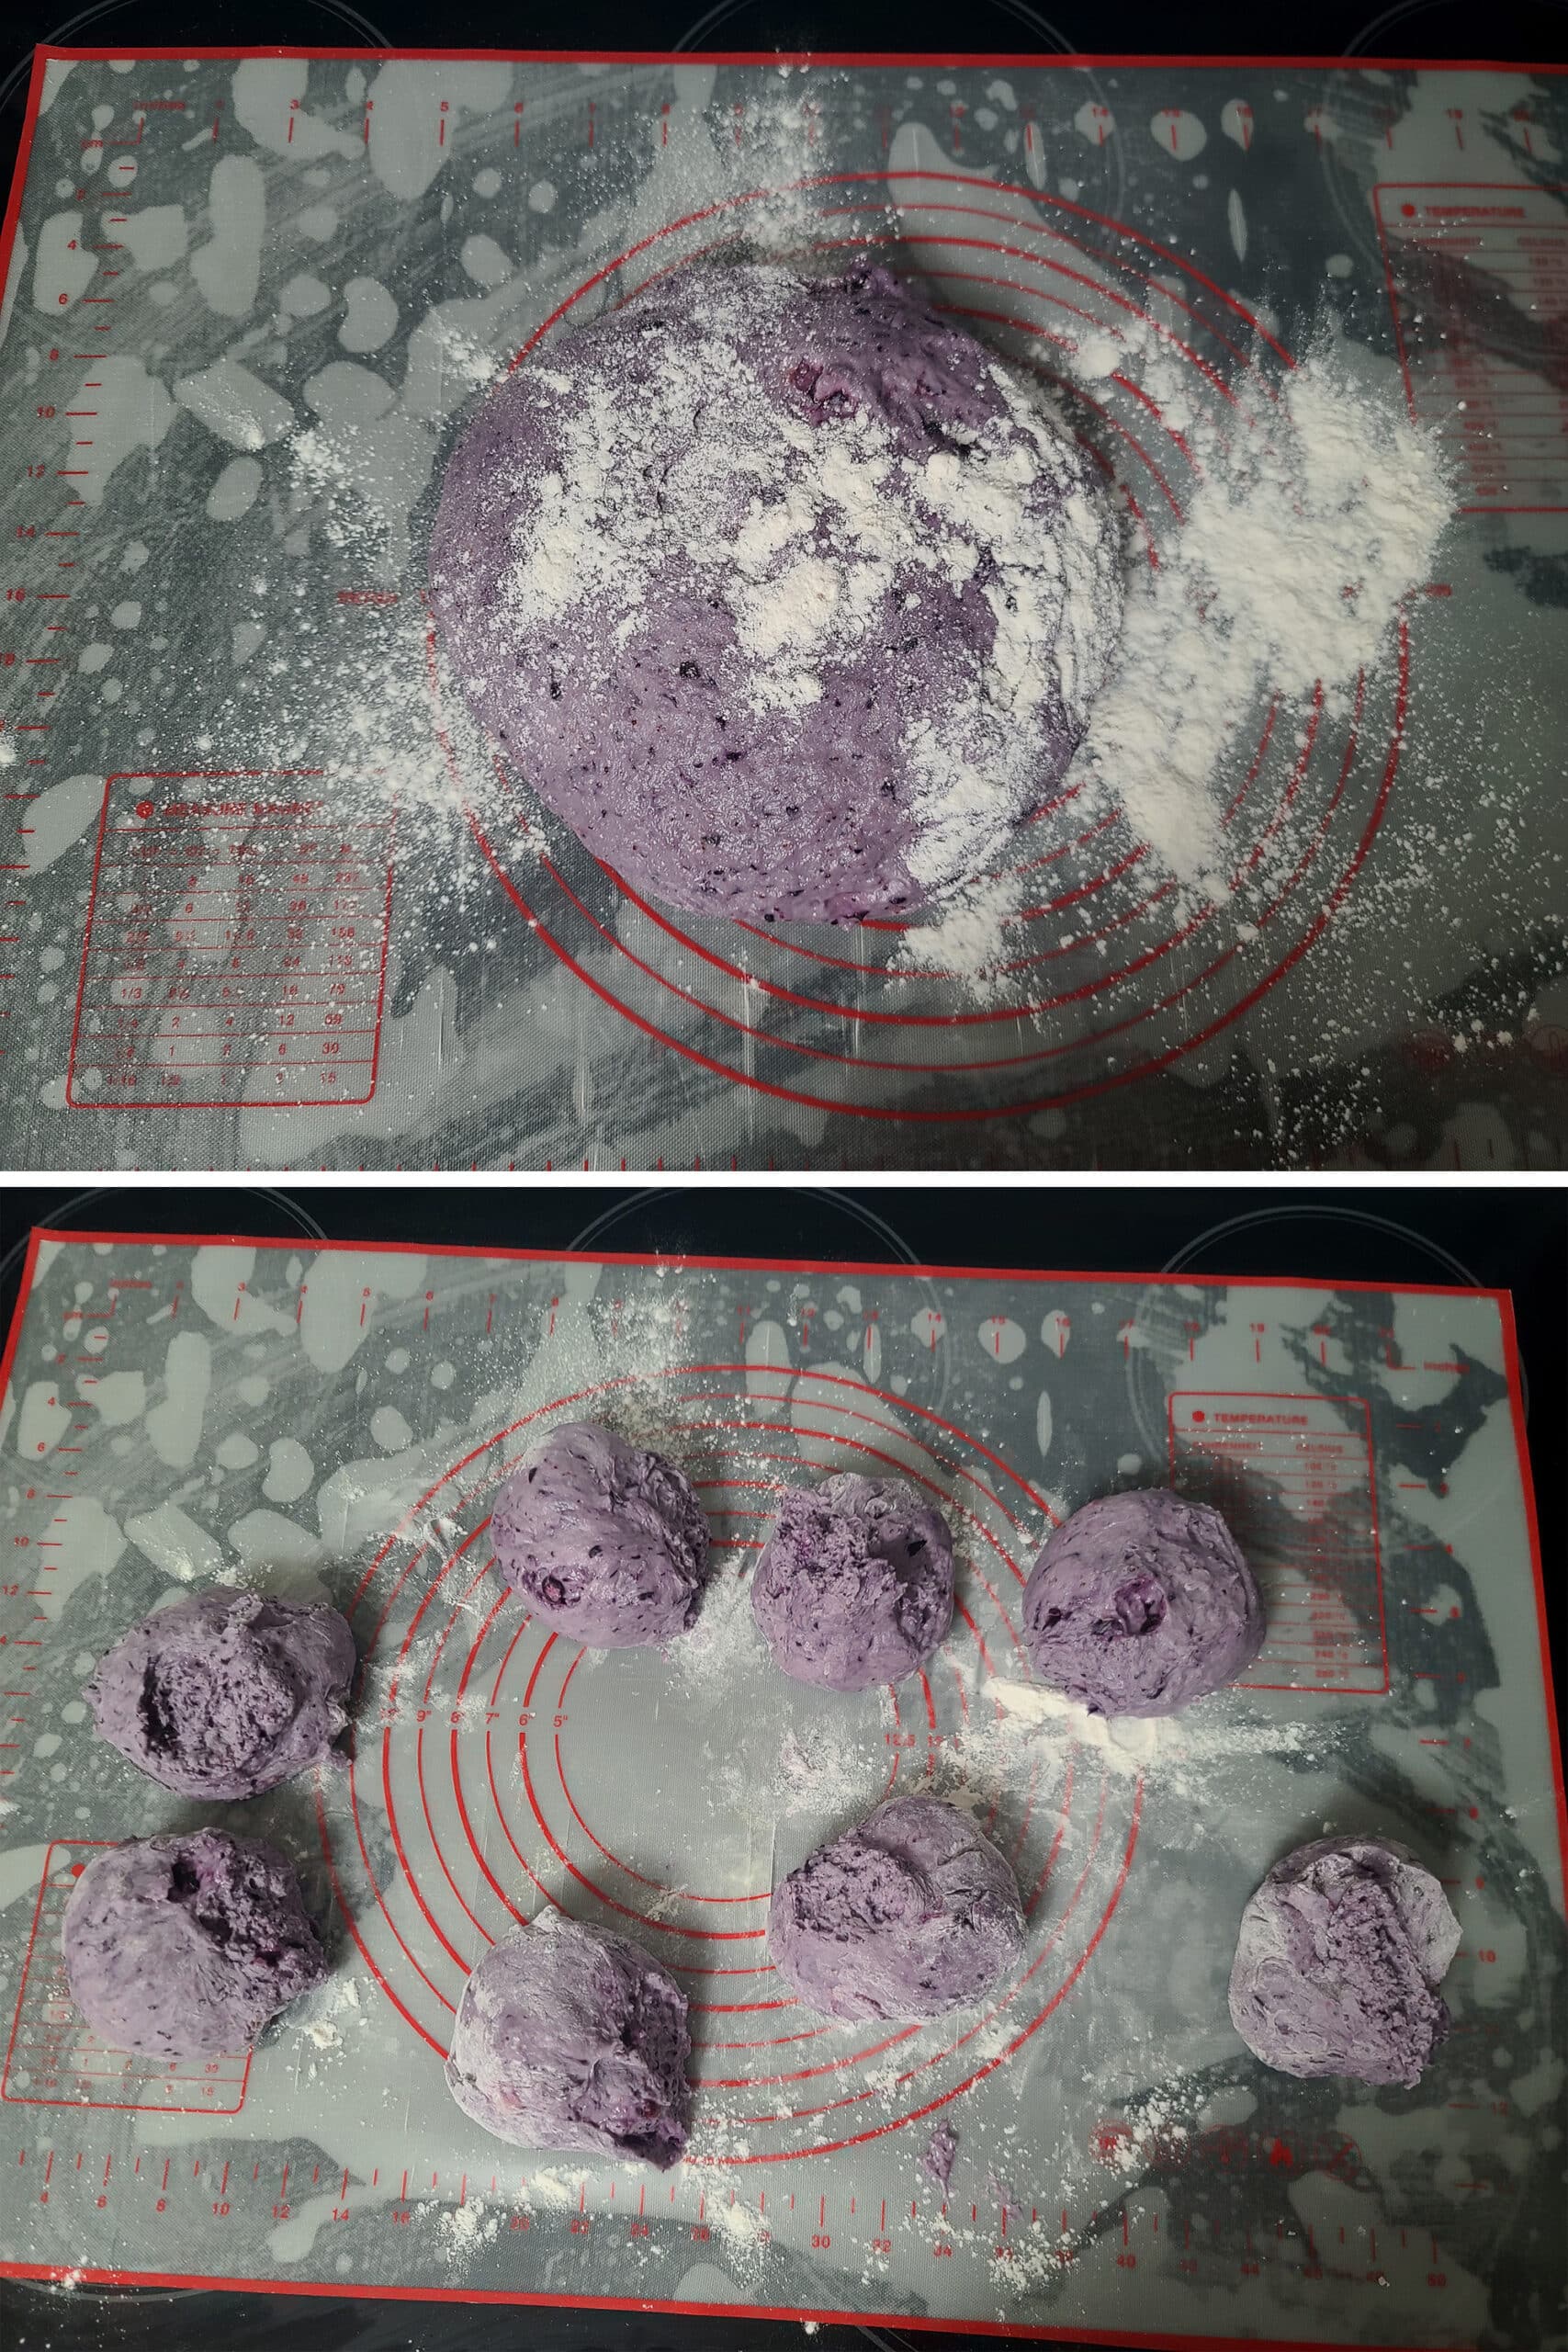 A 2 part image showing the ball of dough on a floured surface, then divided into 8 equal pieces.